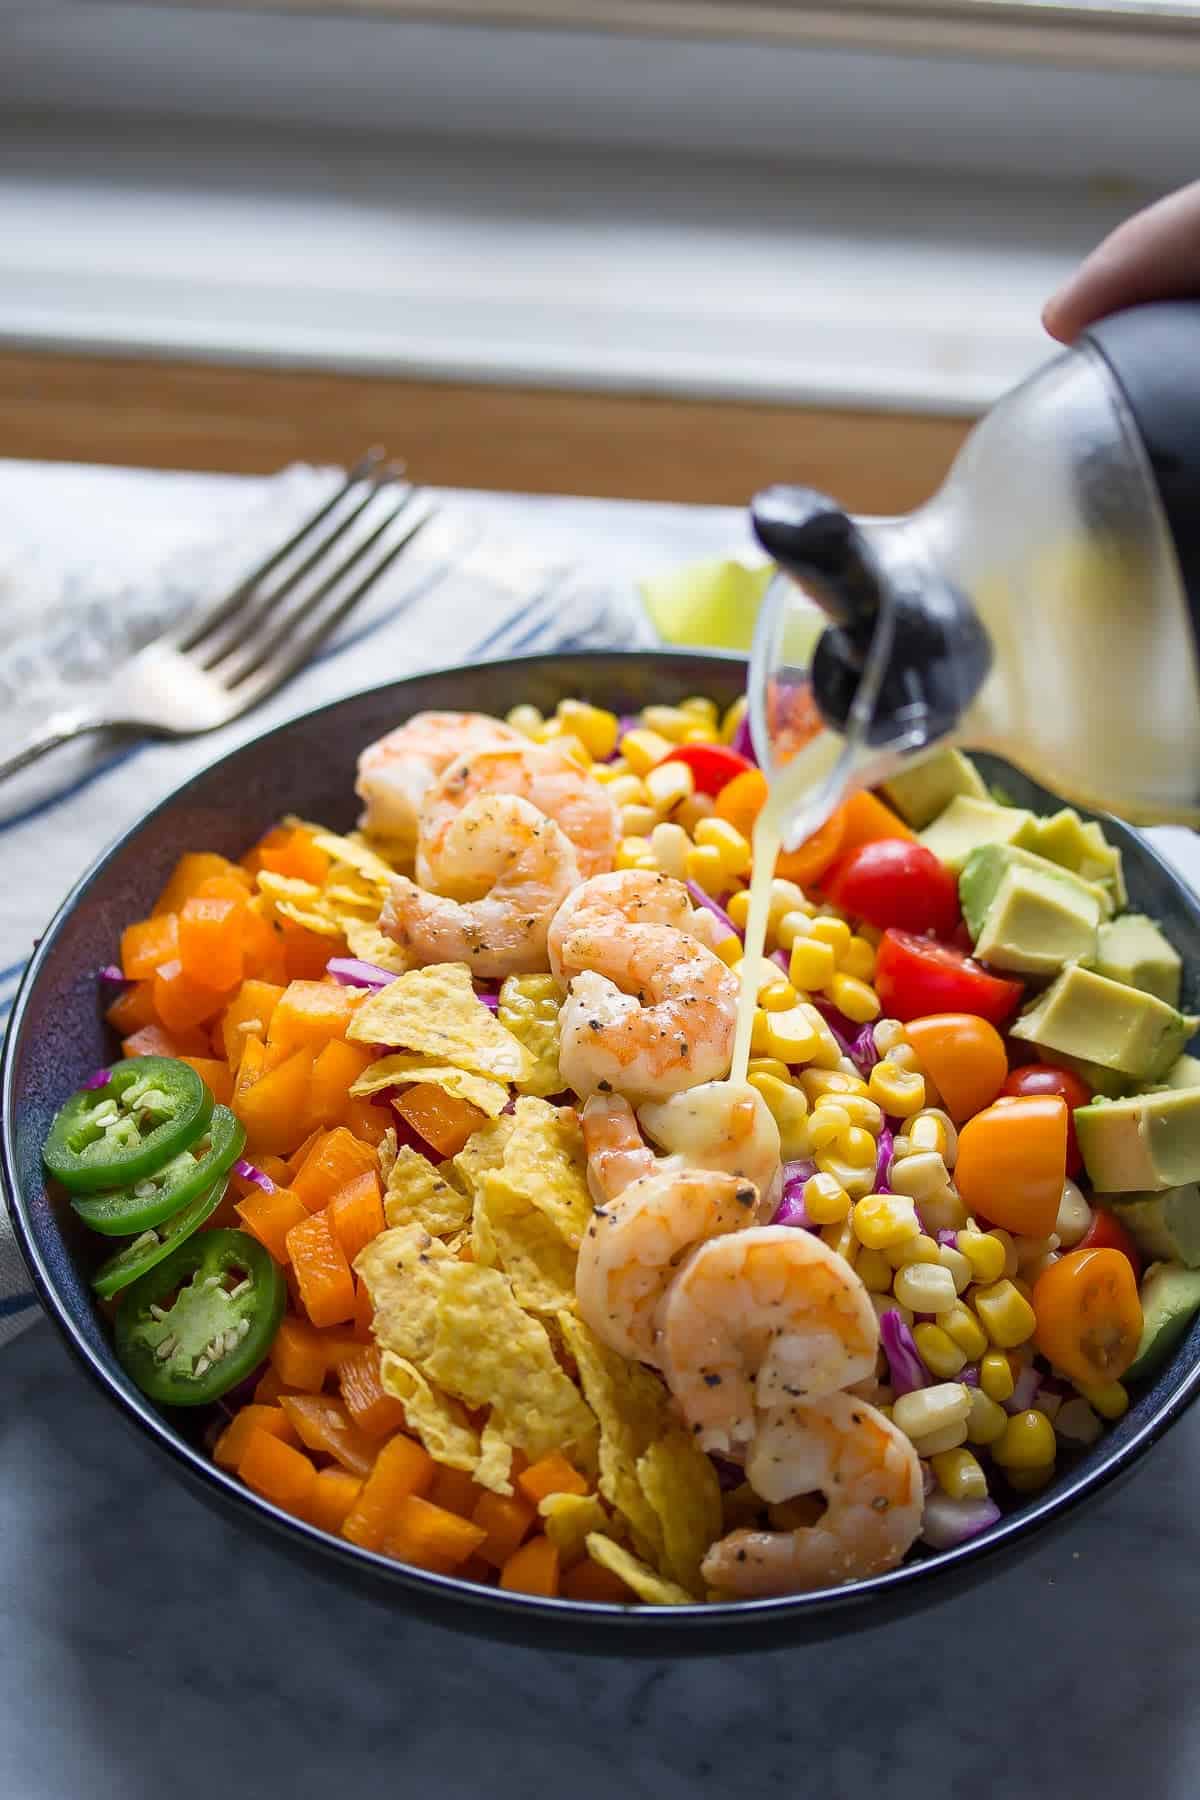 A light and fresh shrimp taco salad recipe that is packed full of veggies and tossed in a honey-lime vinaigrette. Ready in 20 minutes!